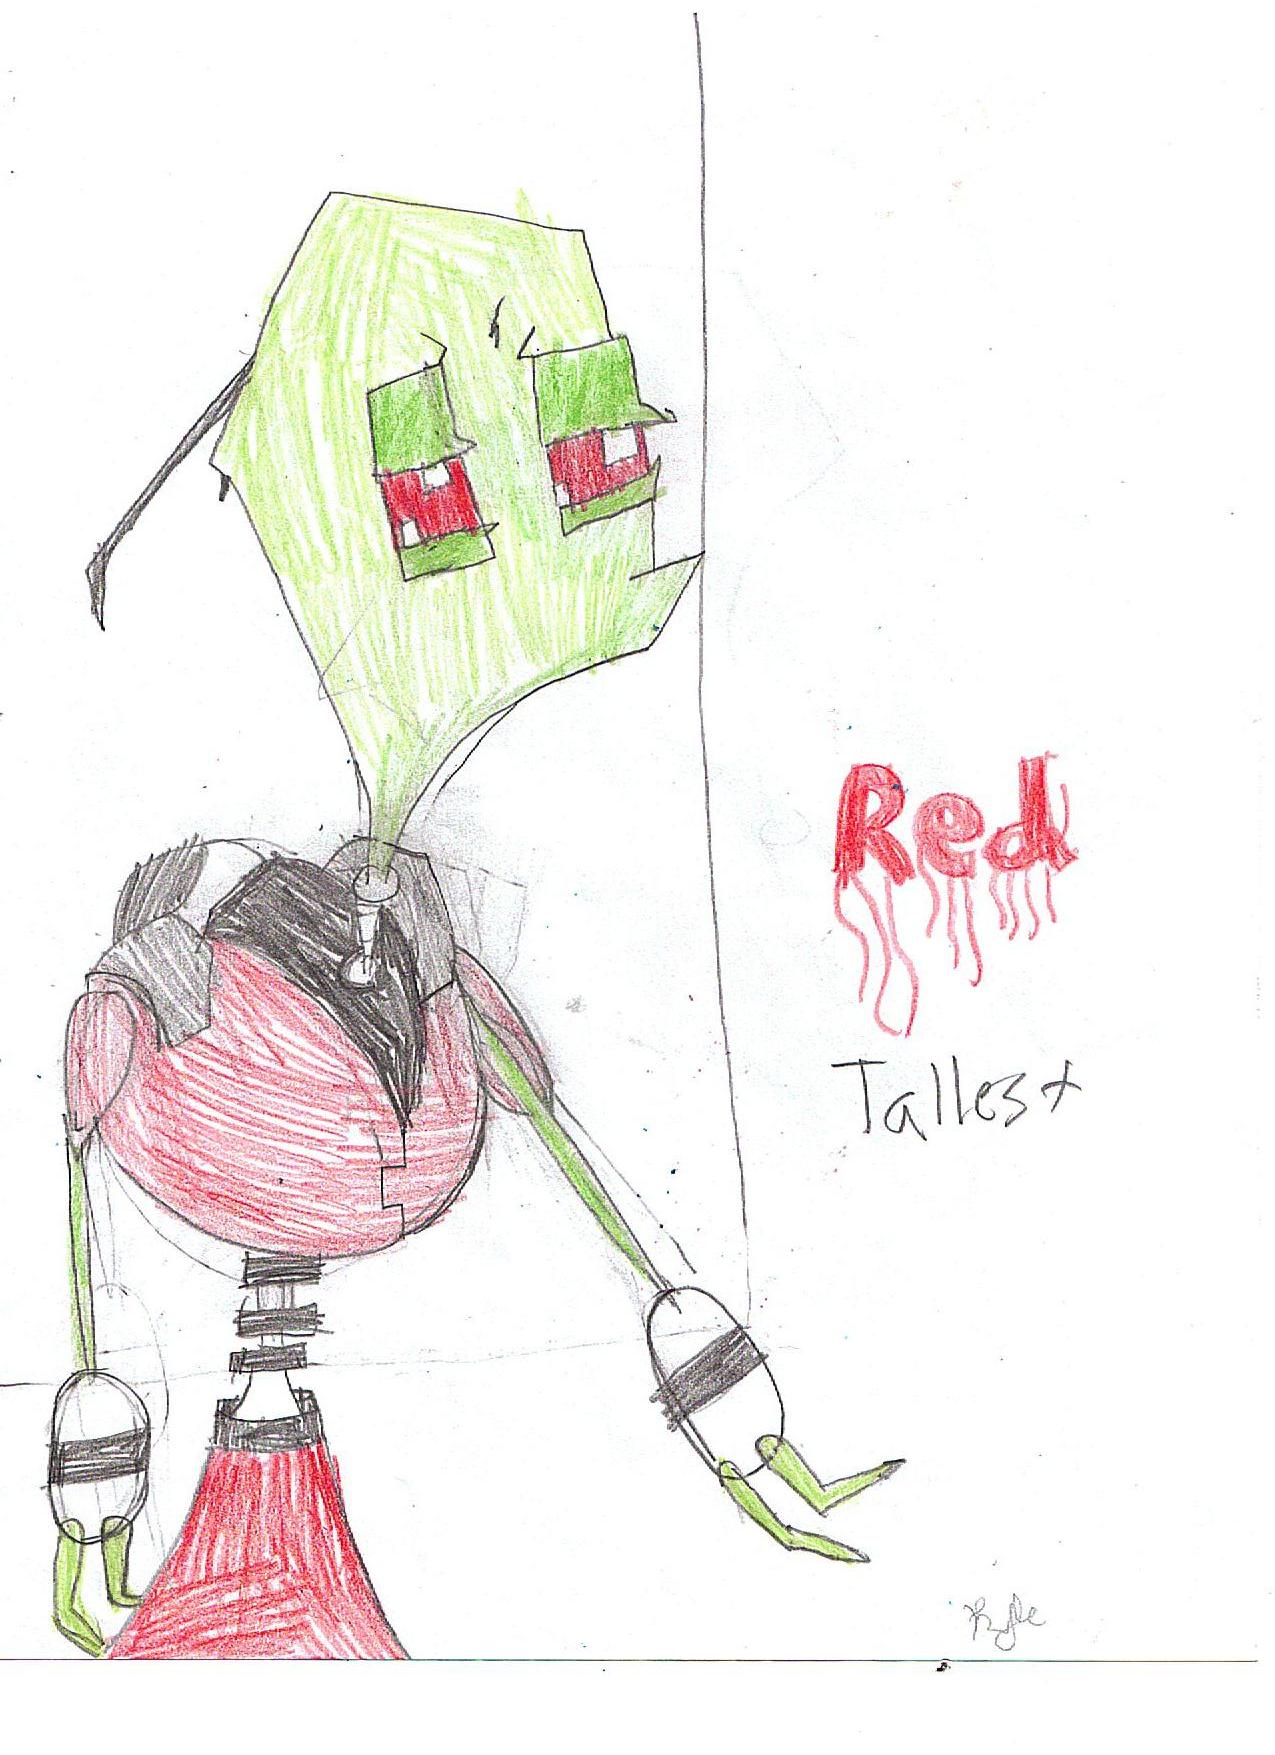 RED TALLEST by 117masterchief